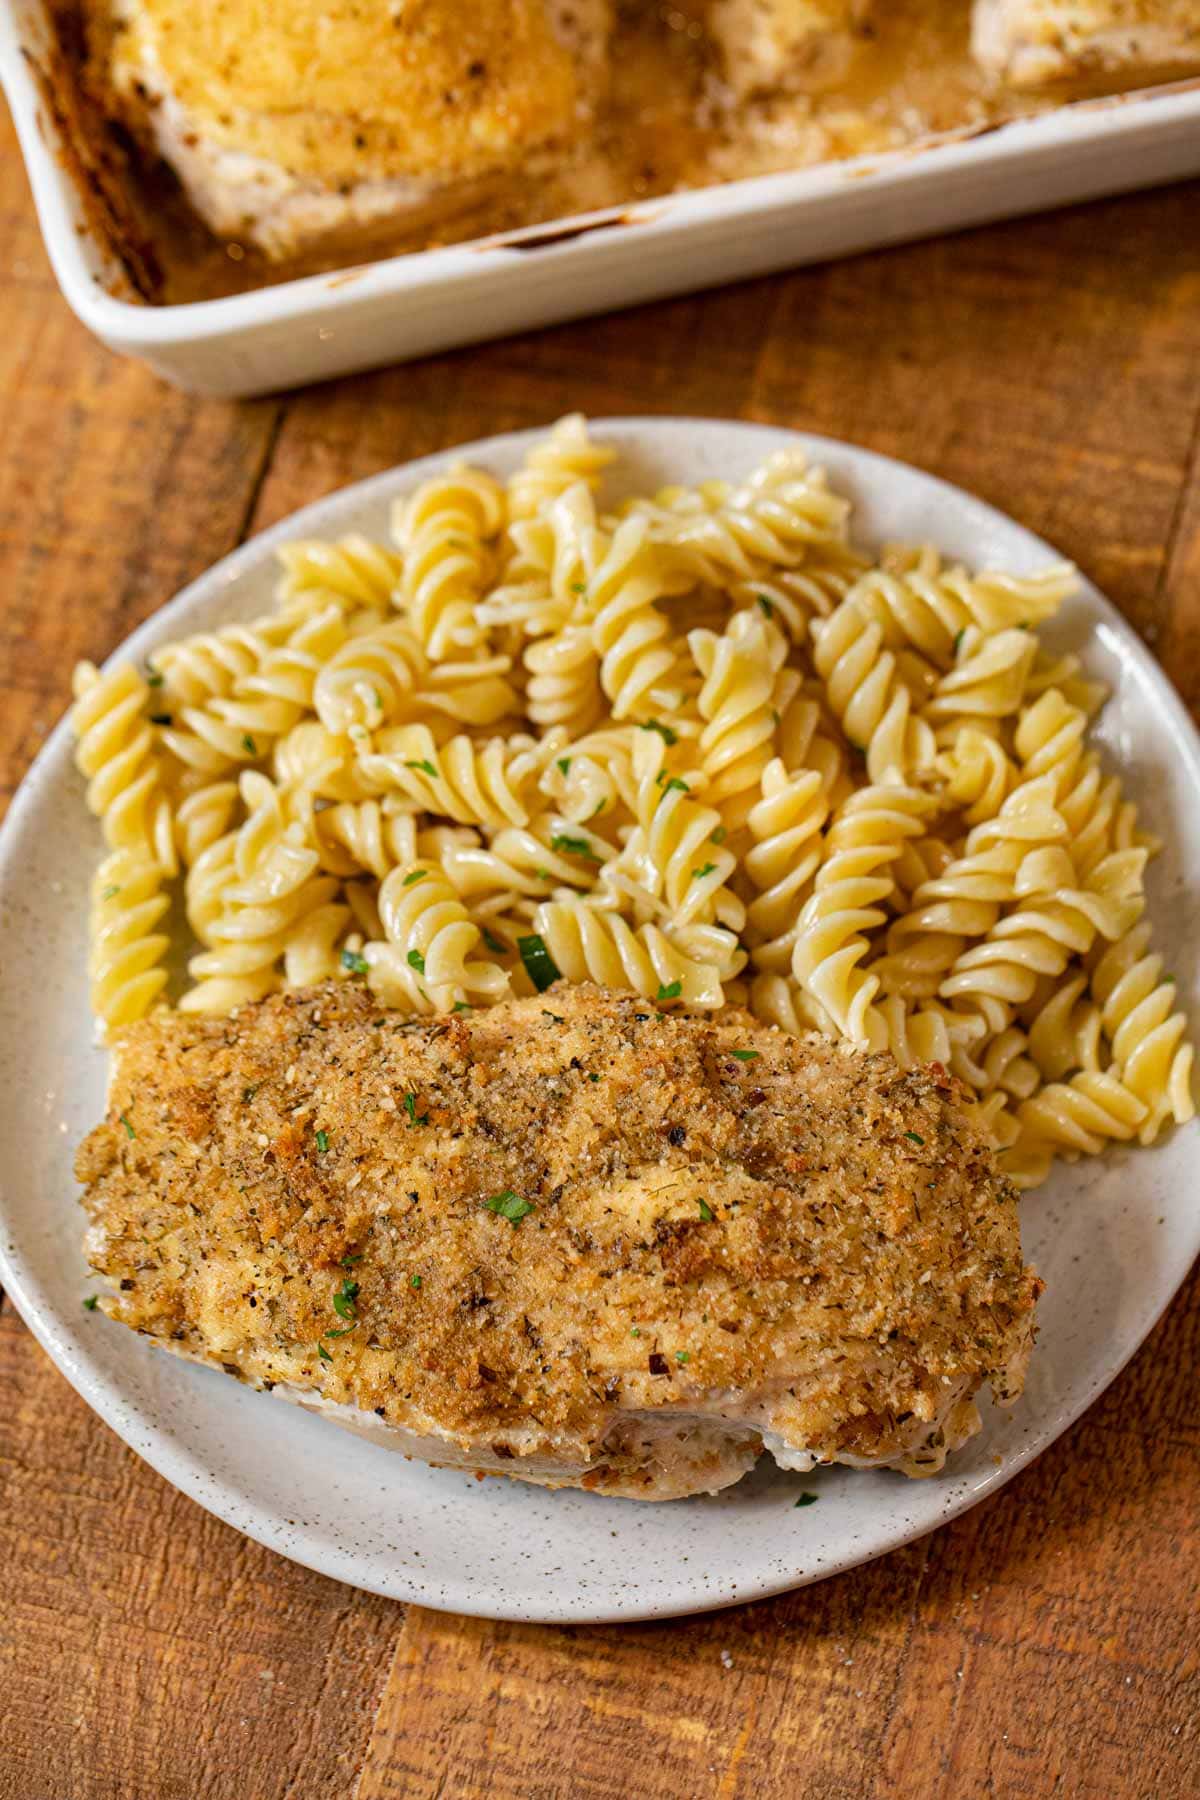 Baked Sour Cream Chicken on plate with pasta